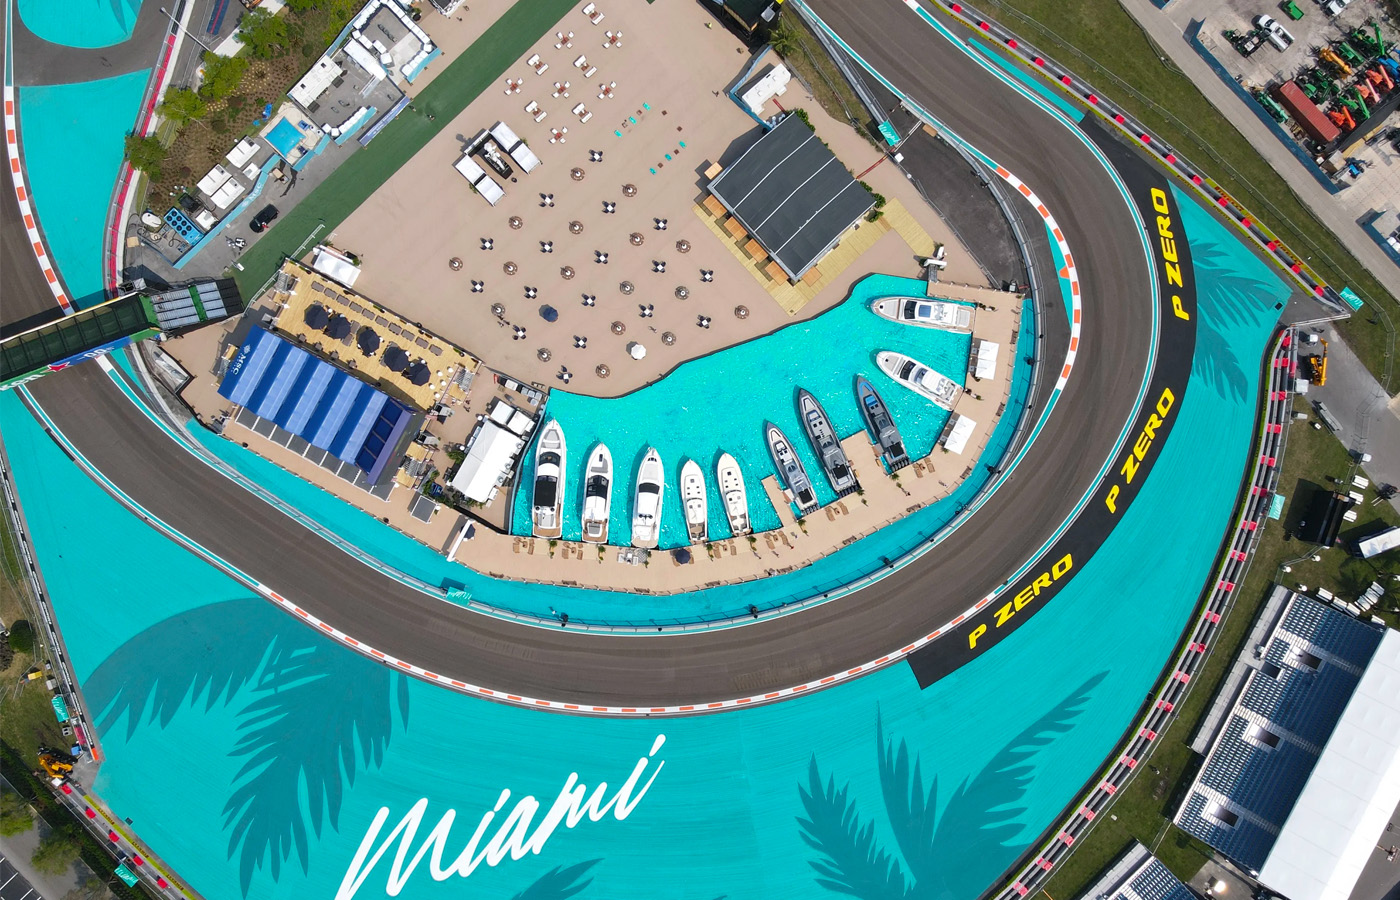 What Was the "Yacht Club" at the Inaugural Miami Grand Prix Formula 1